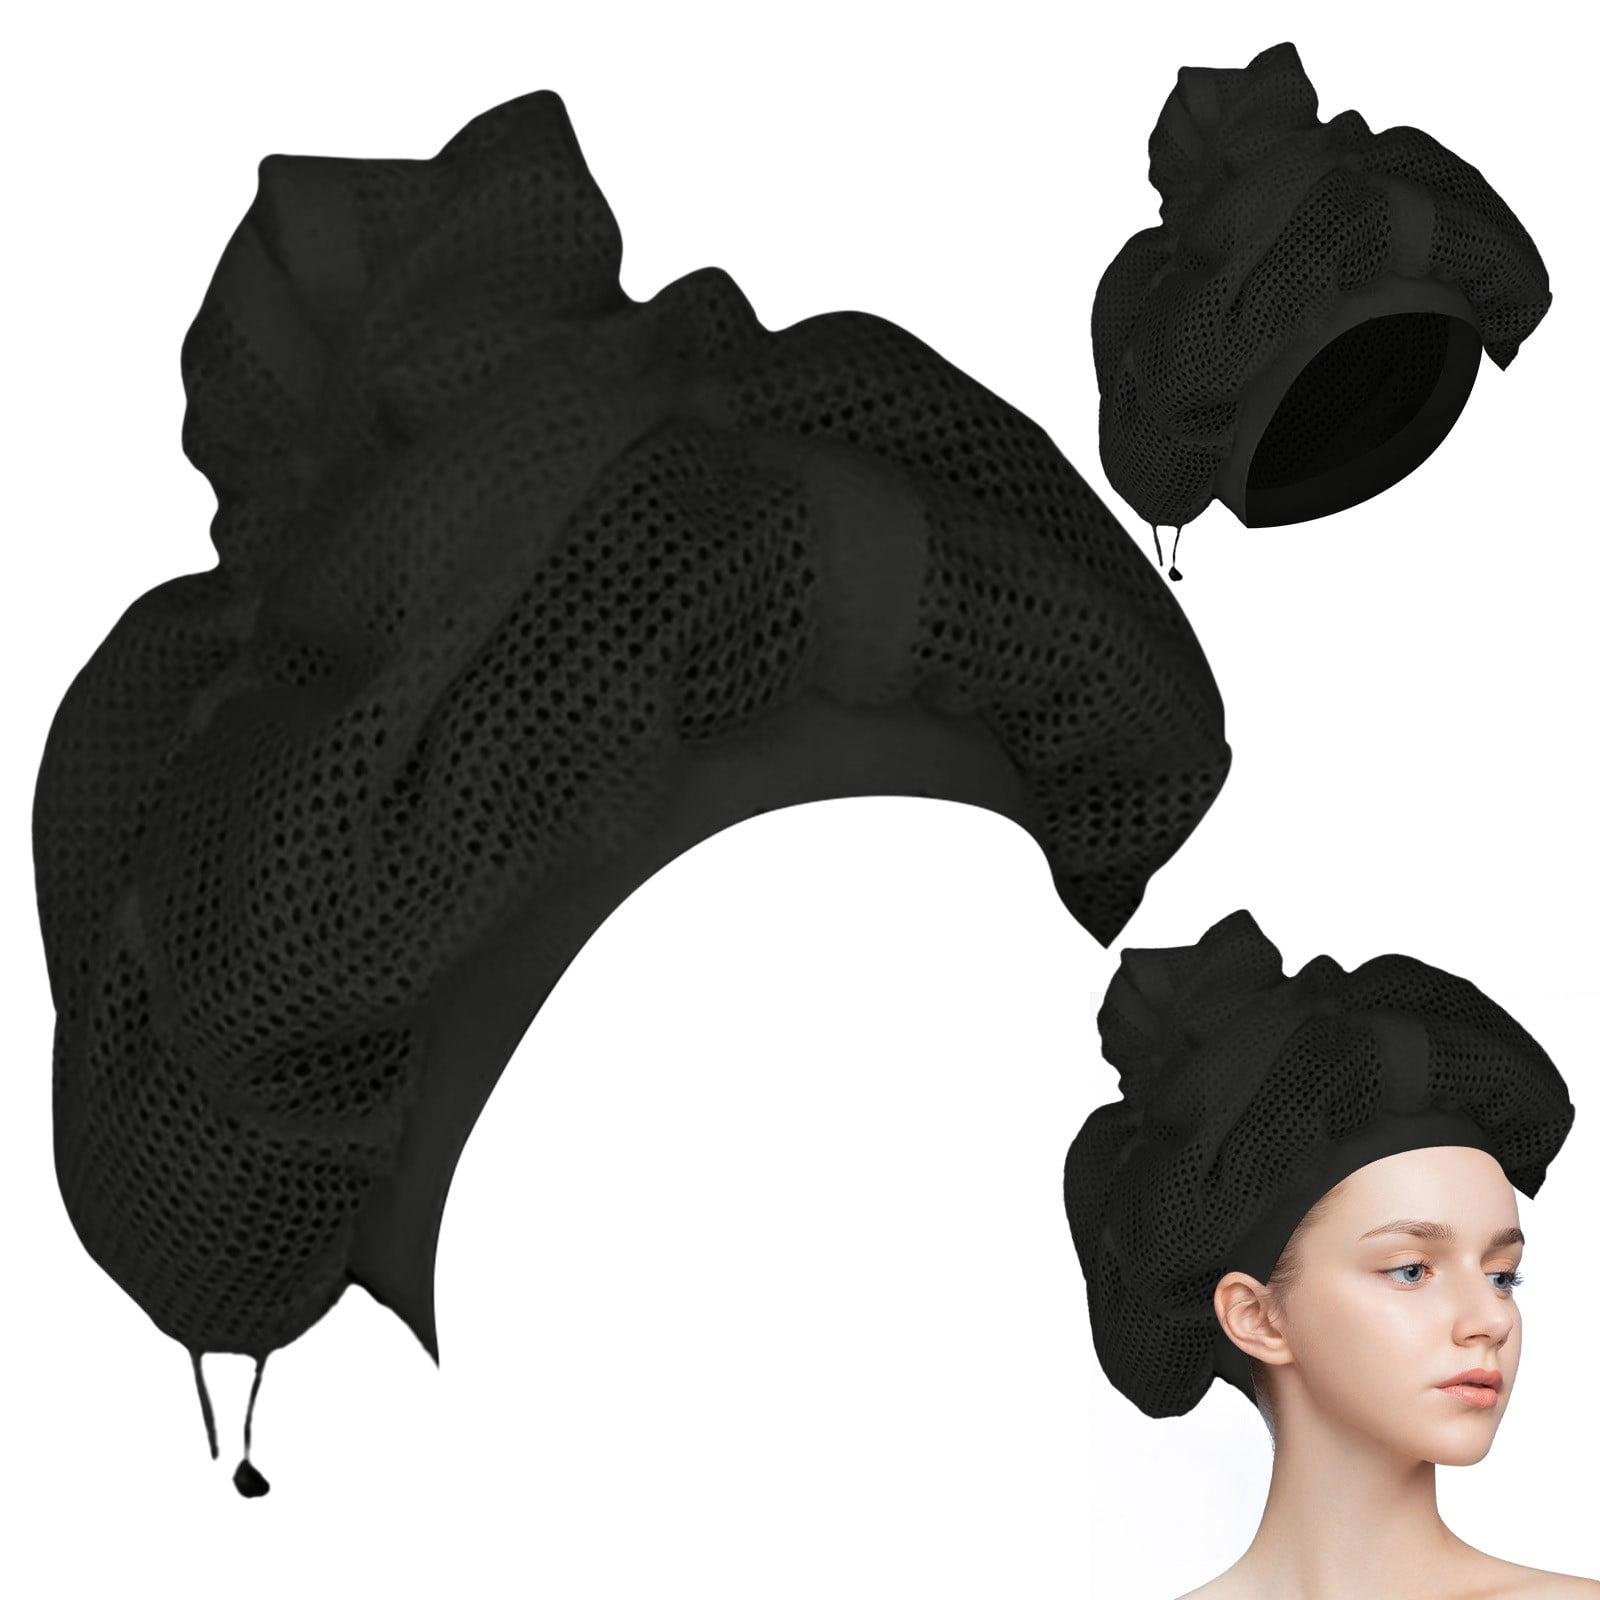 Mbvtdt Net Plopping Cap for Drying Curly with Drawstring - Adjustable Curly  Hair Net Plopping Net 